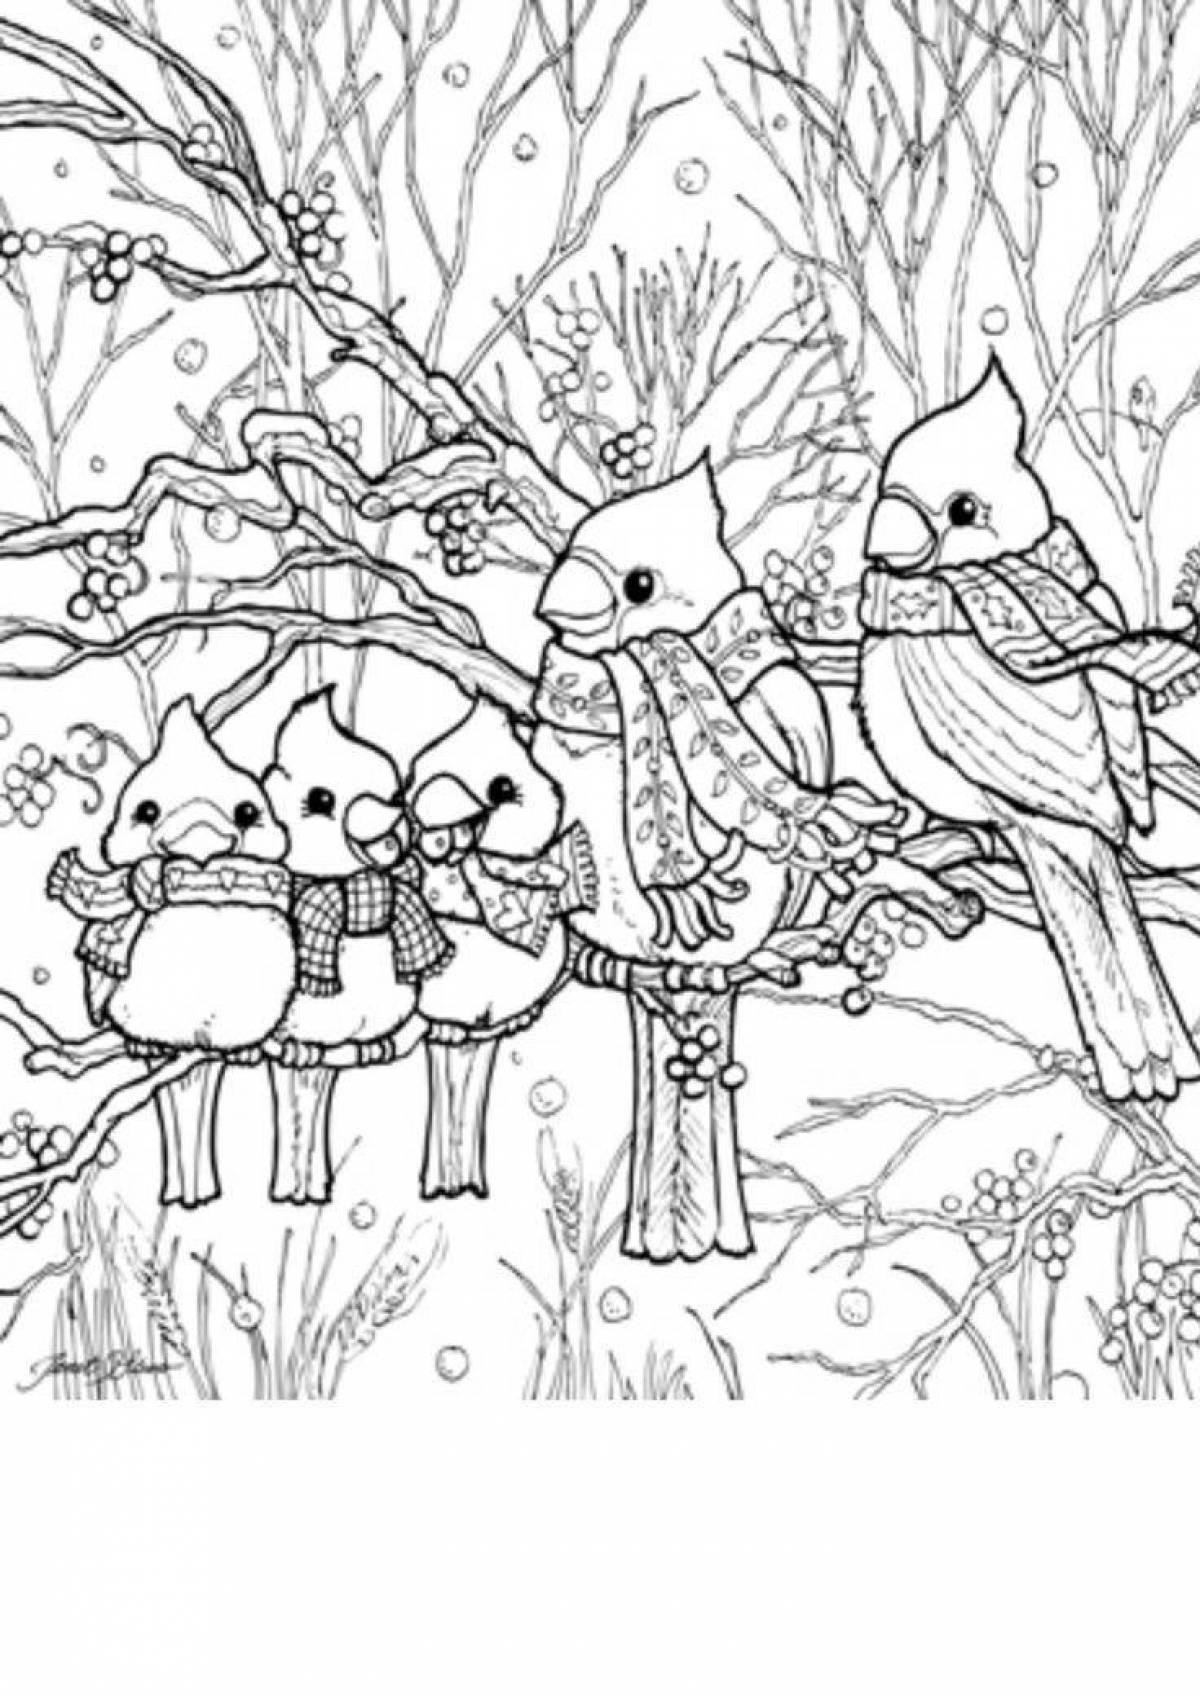 Shiny winter birds coloring page